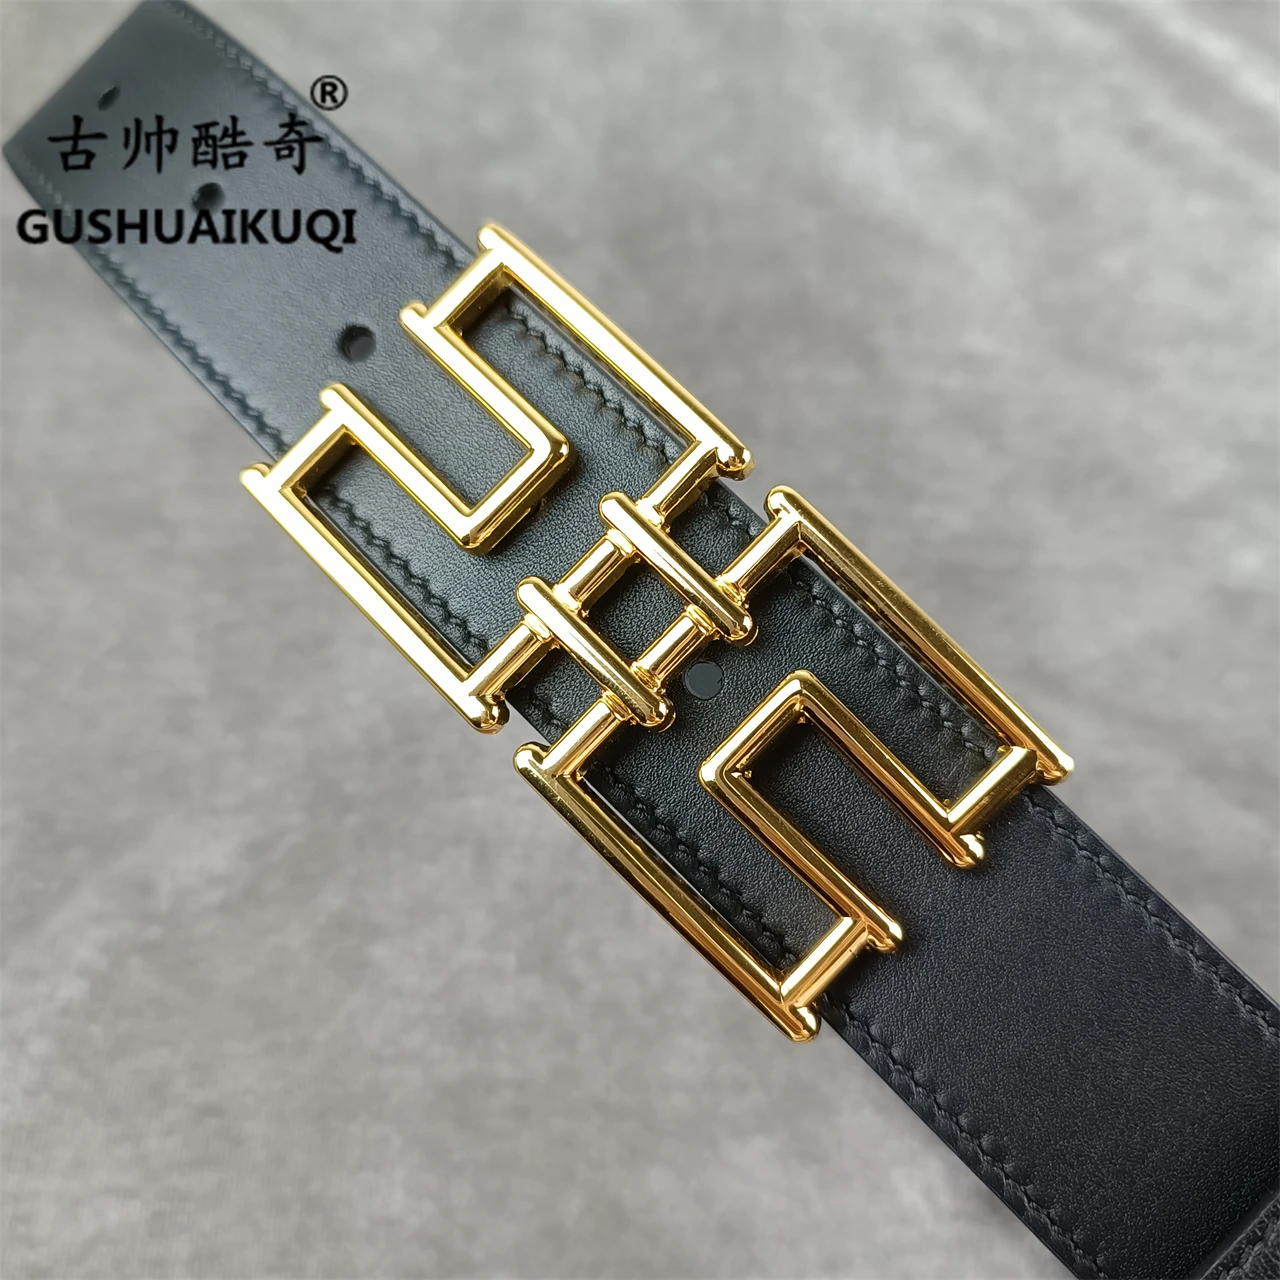 2022 men's and women's wide buckle3.0cm Gu Shuai new design men's and women's belt high-quality cowhide leather double-sided fr